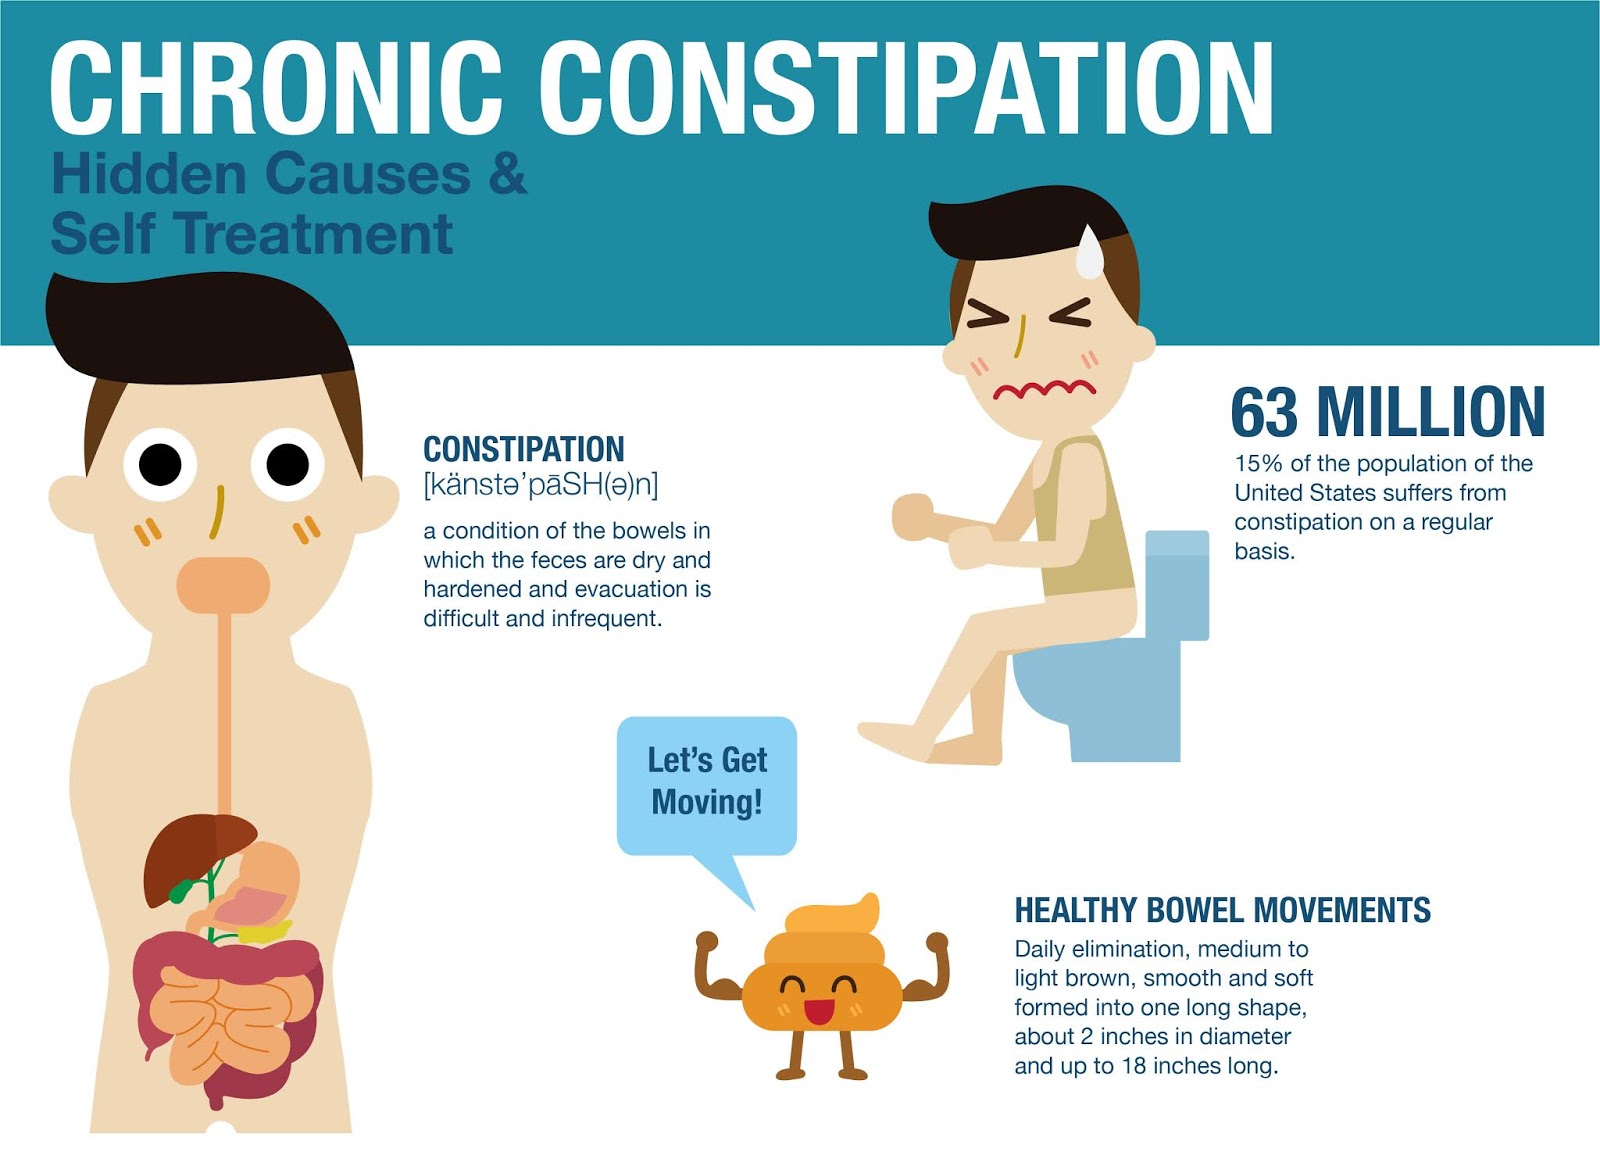 Does prostate cause constipation